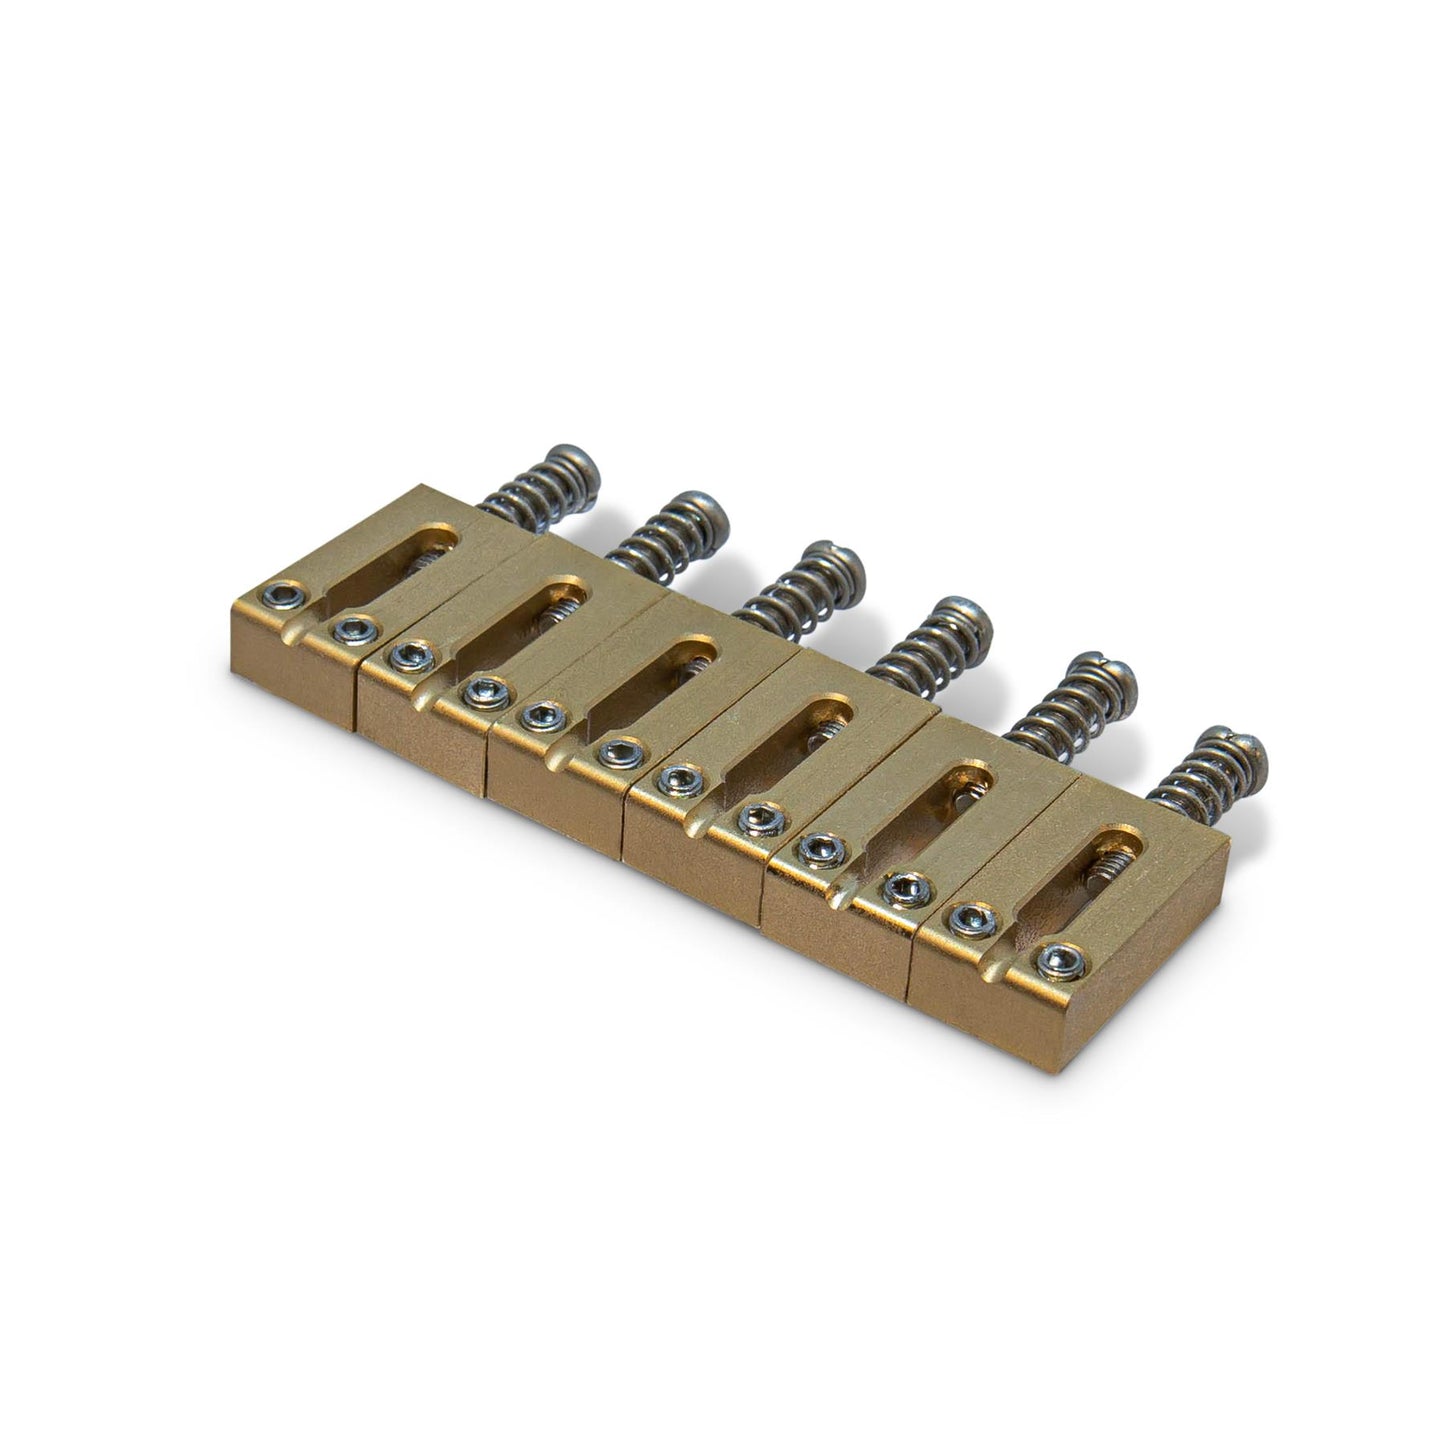 6 x 10.8mm Solid Brass Bridge Tremolo Saddles for Stratocaster Electric Guitar